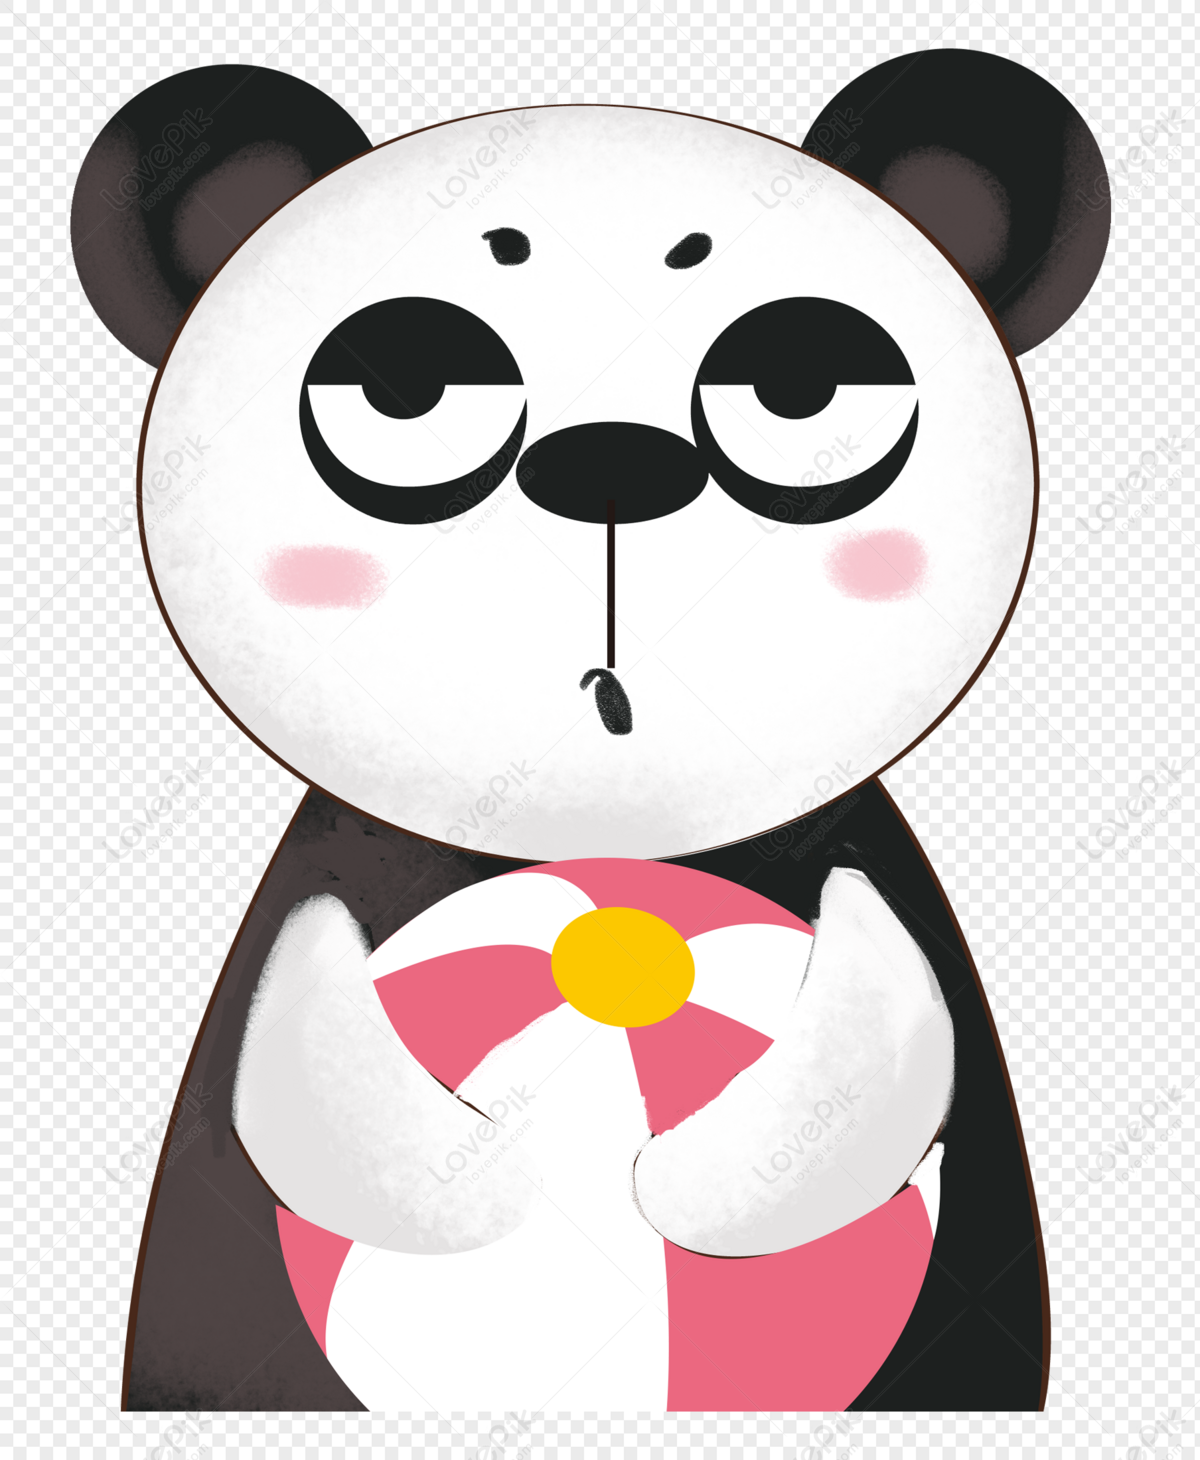 Hand Painted Cartoon Panda PNG Image Free Download And Clipart Image For  Free Download - Lovepik | 400206811